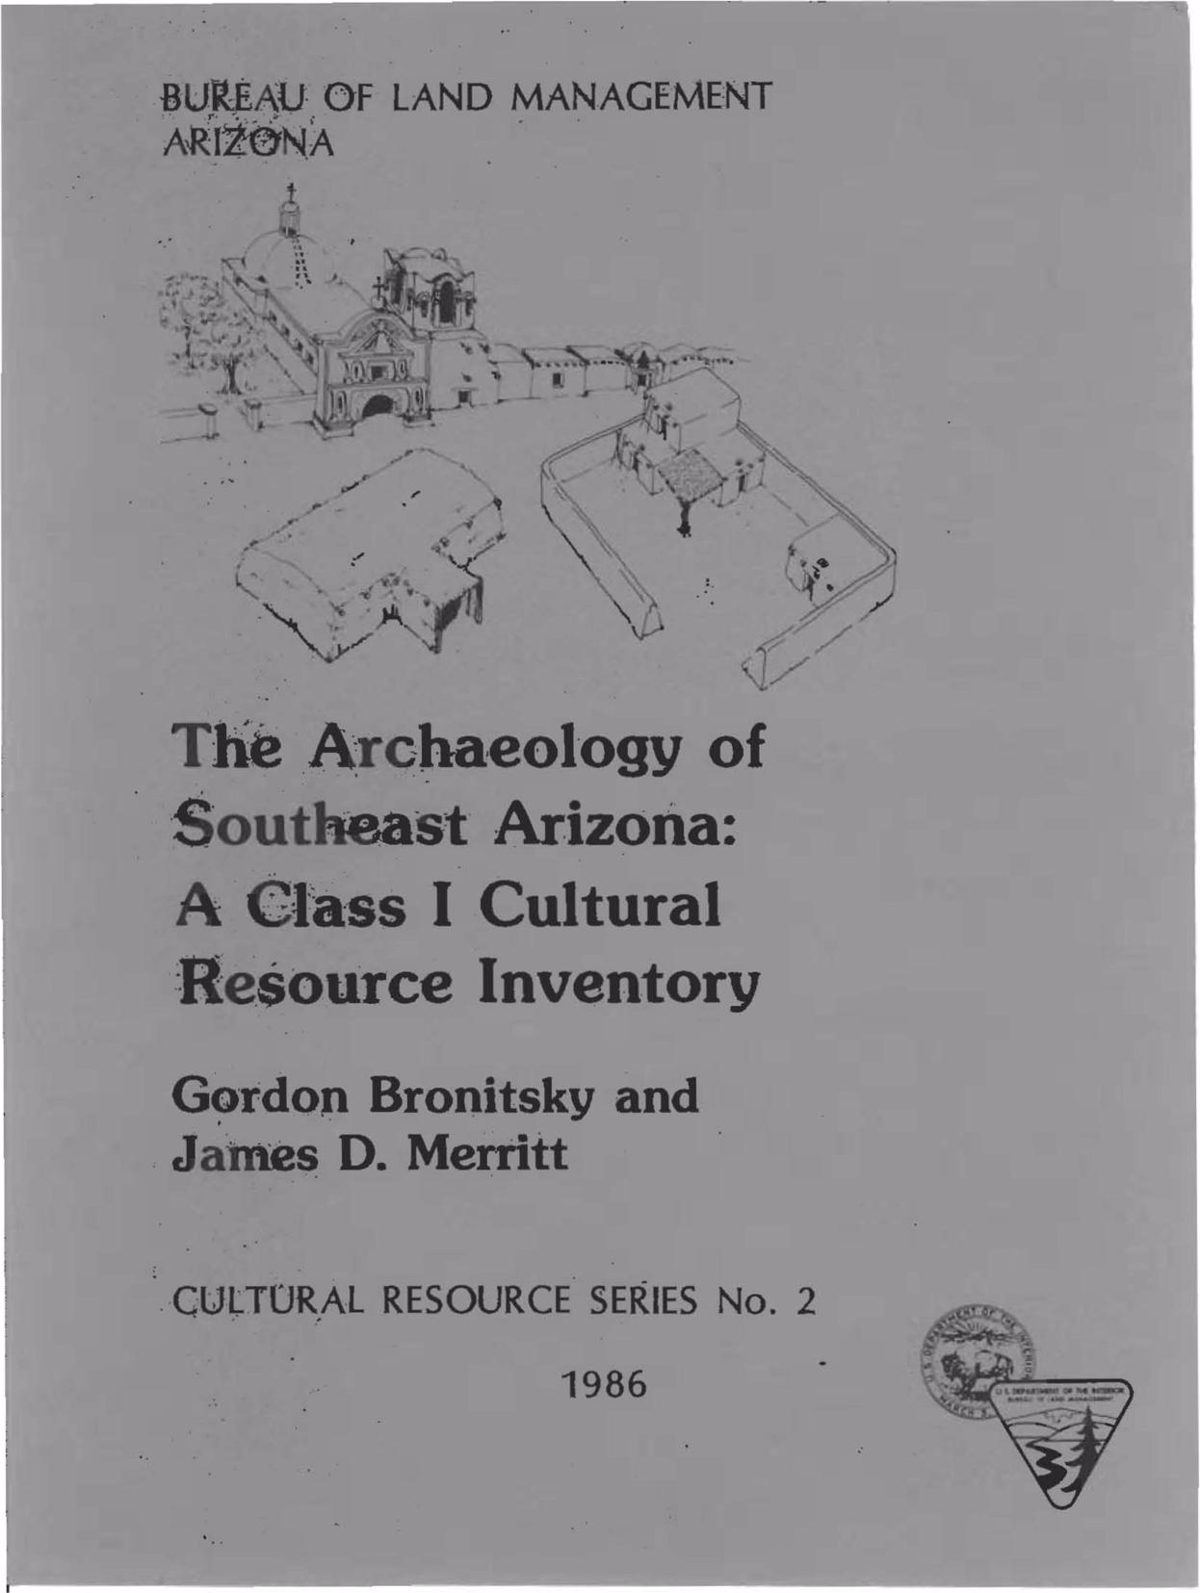 The Archaeology of Southeast Arizona: A Class I Cultural Resource Inventory Cover Page